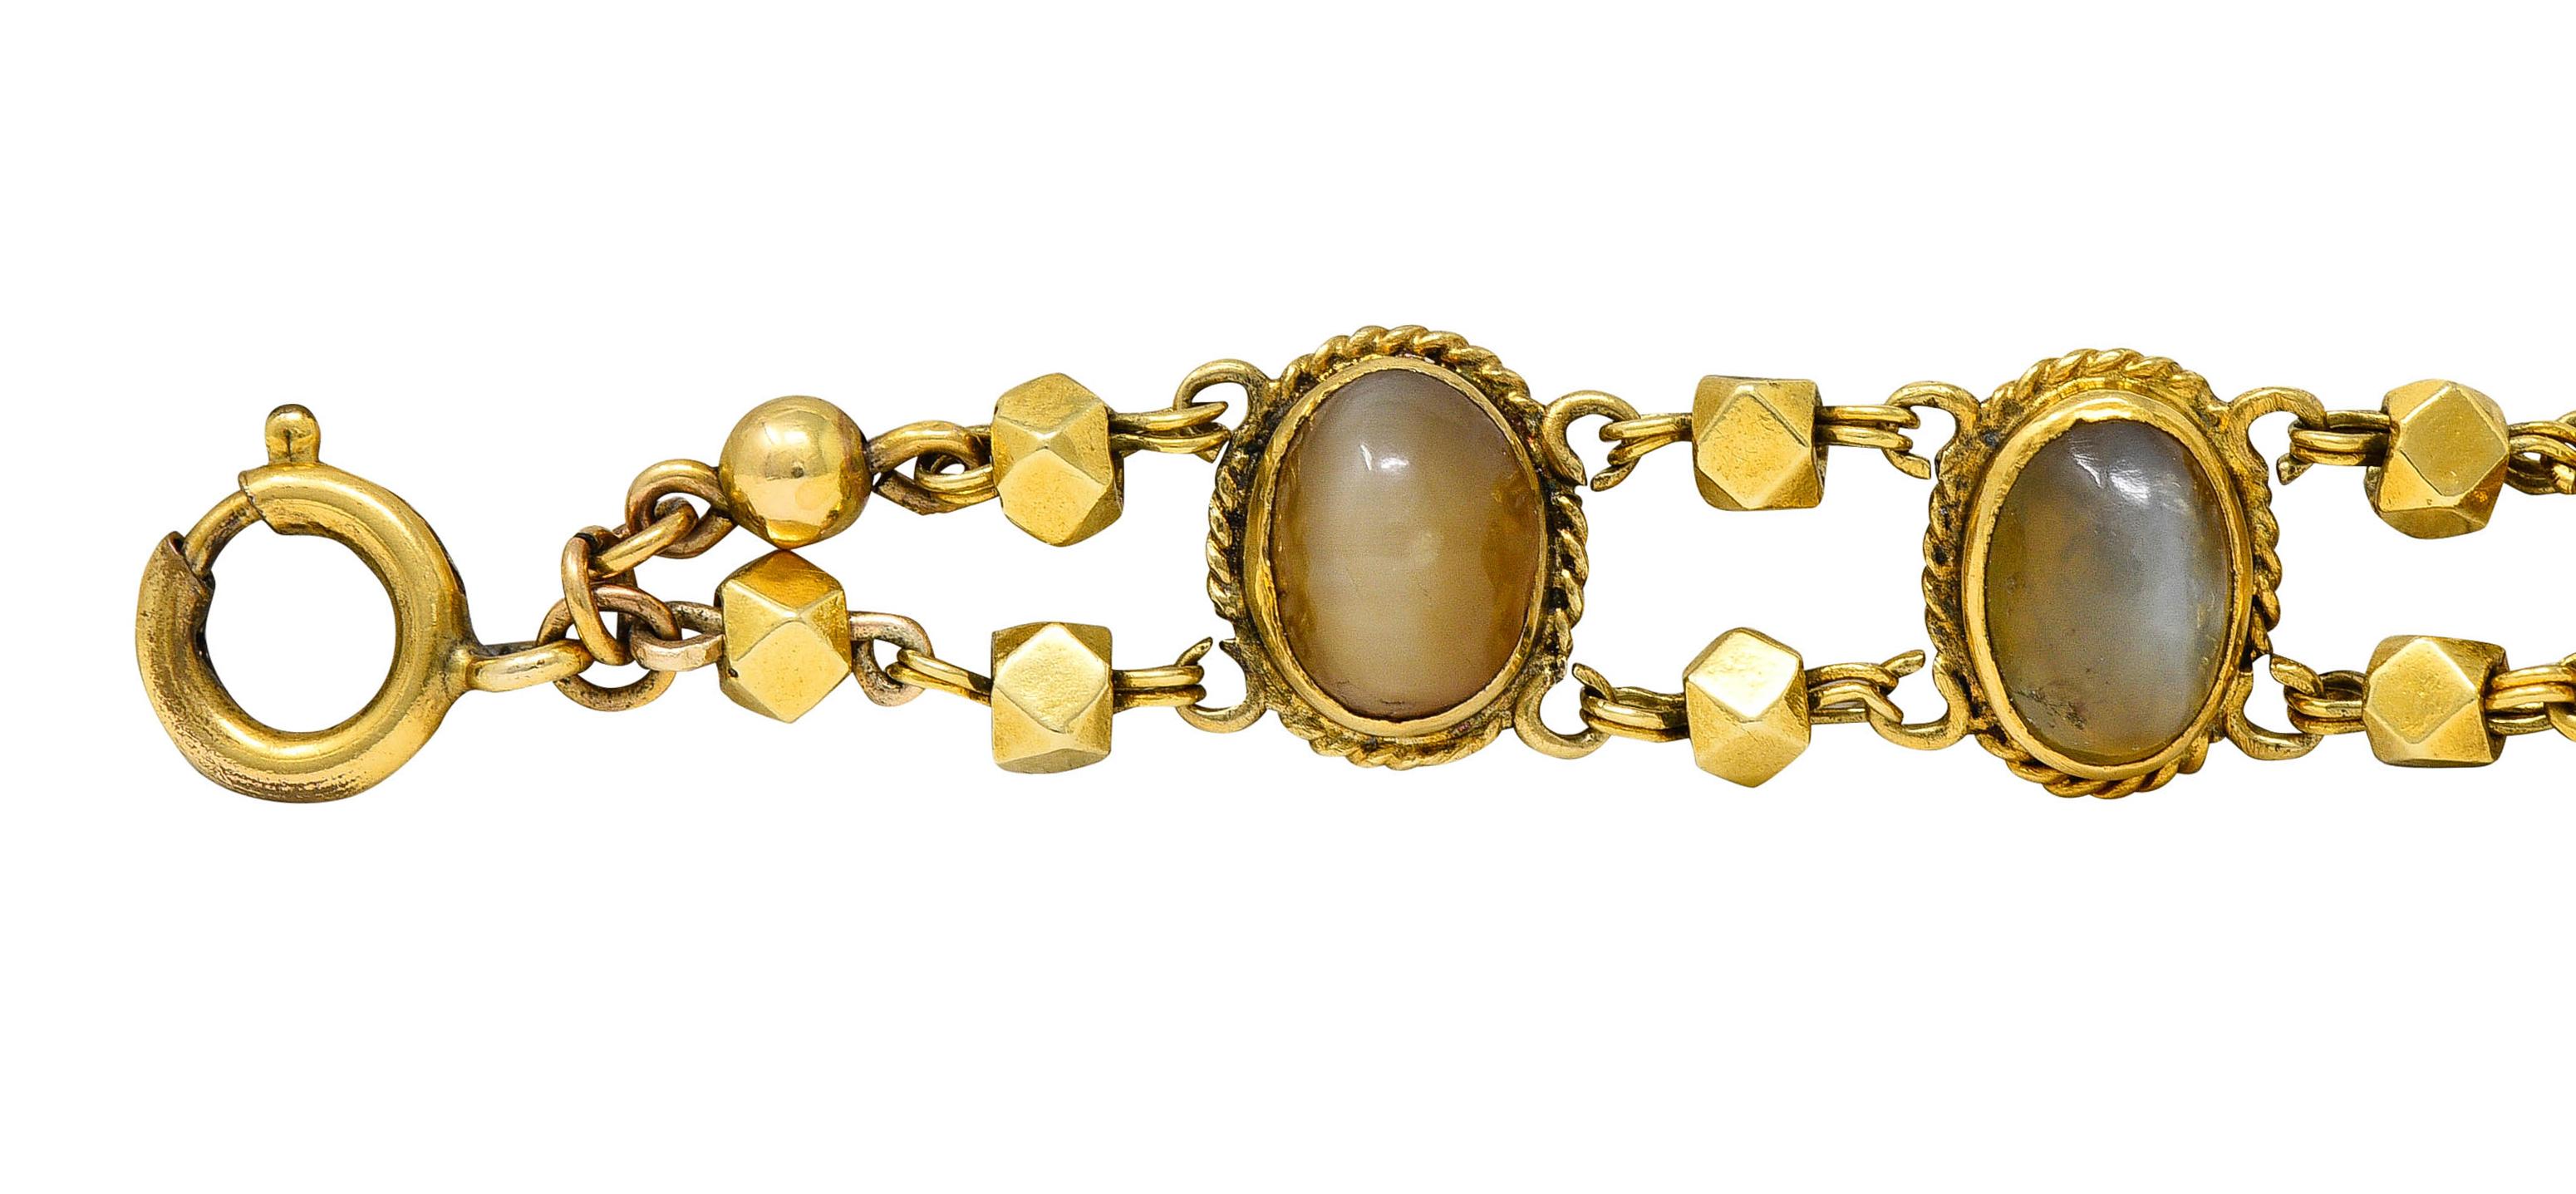 Bracelet is comprised of gemmed oval links alternating with faceted gold spacer beads

Featuring oval cat's eye chrysoberyl measuring from 9.0 x 6.5 mm to 7.0 x 5.5 mm

Well matched translucent brownish olive green in color with moderate to strong